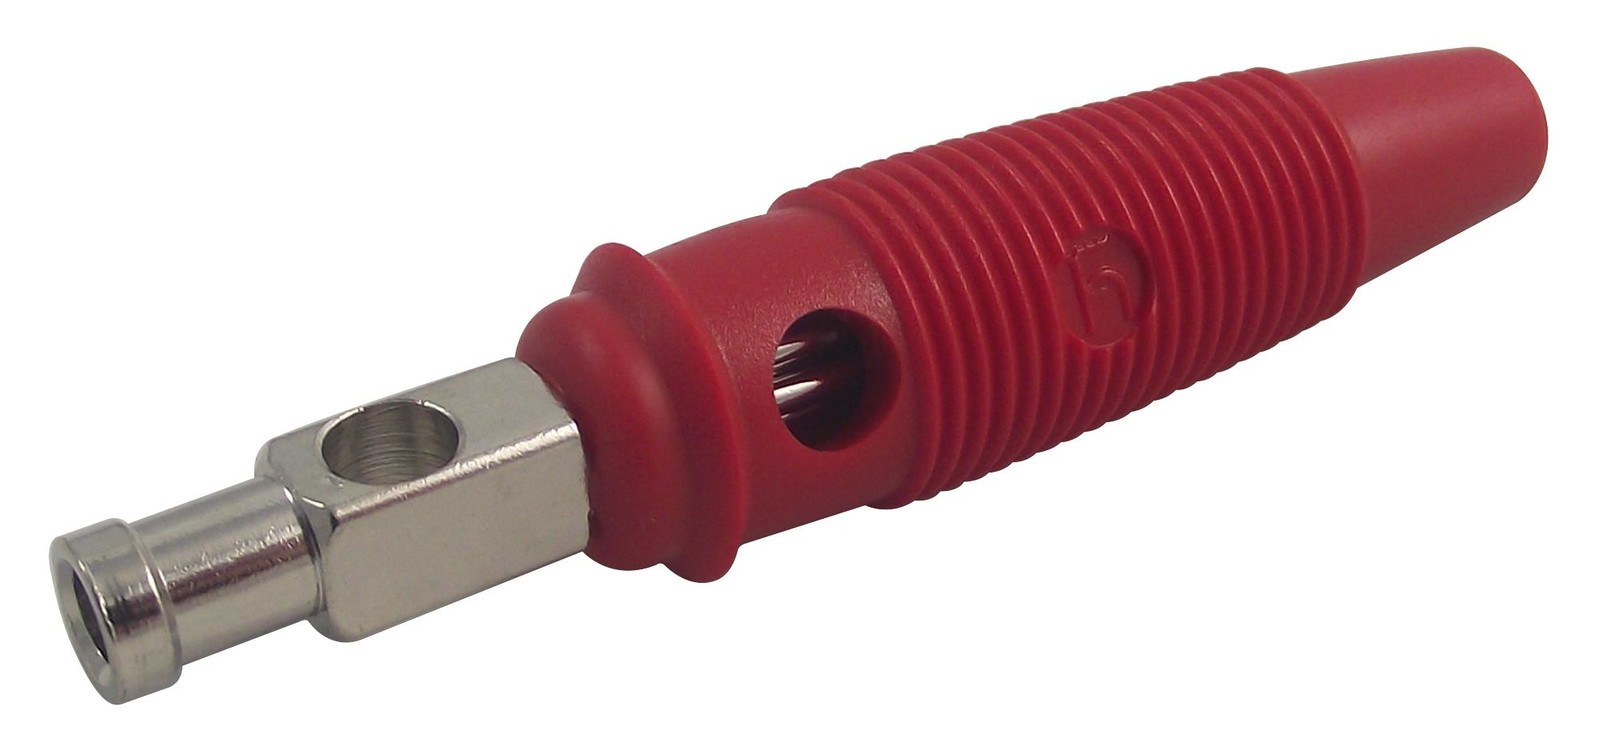 Hirschmann Test And Measurement 930727101 Plug, 4mm, Bunch Pin, Red, Pk5, Bsb